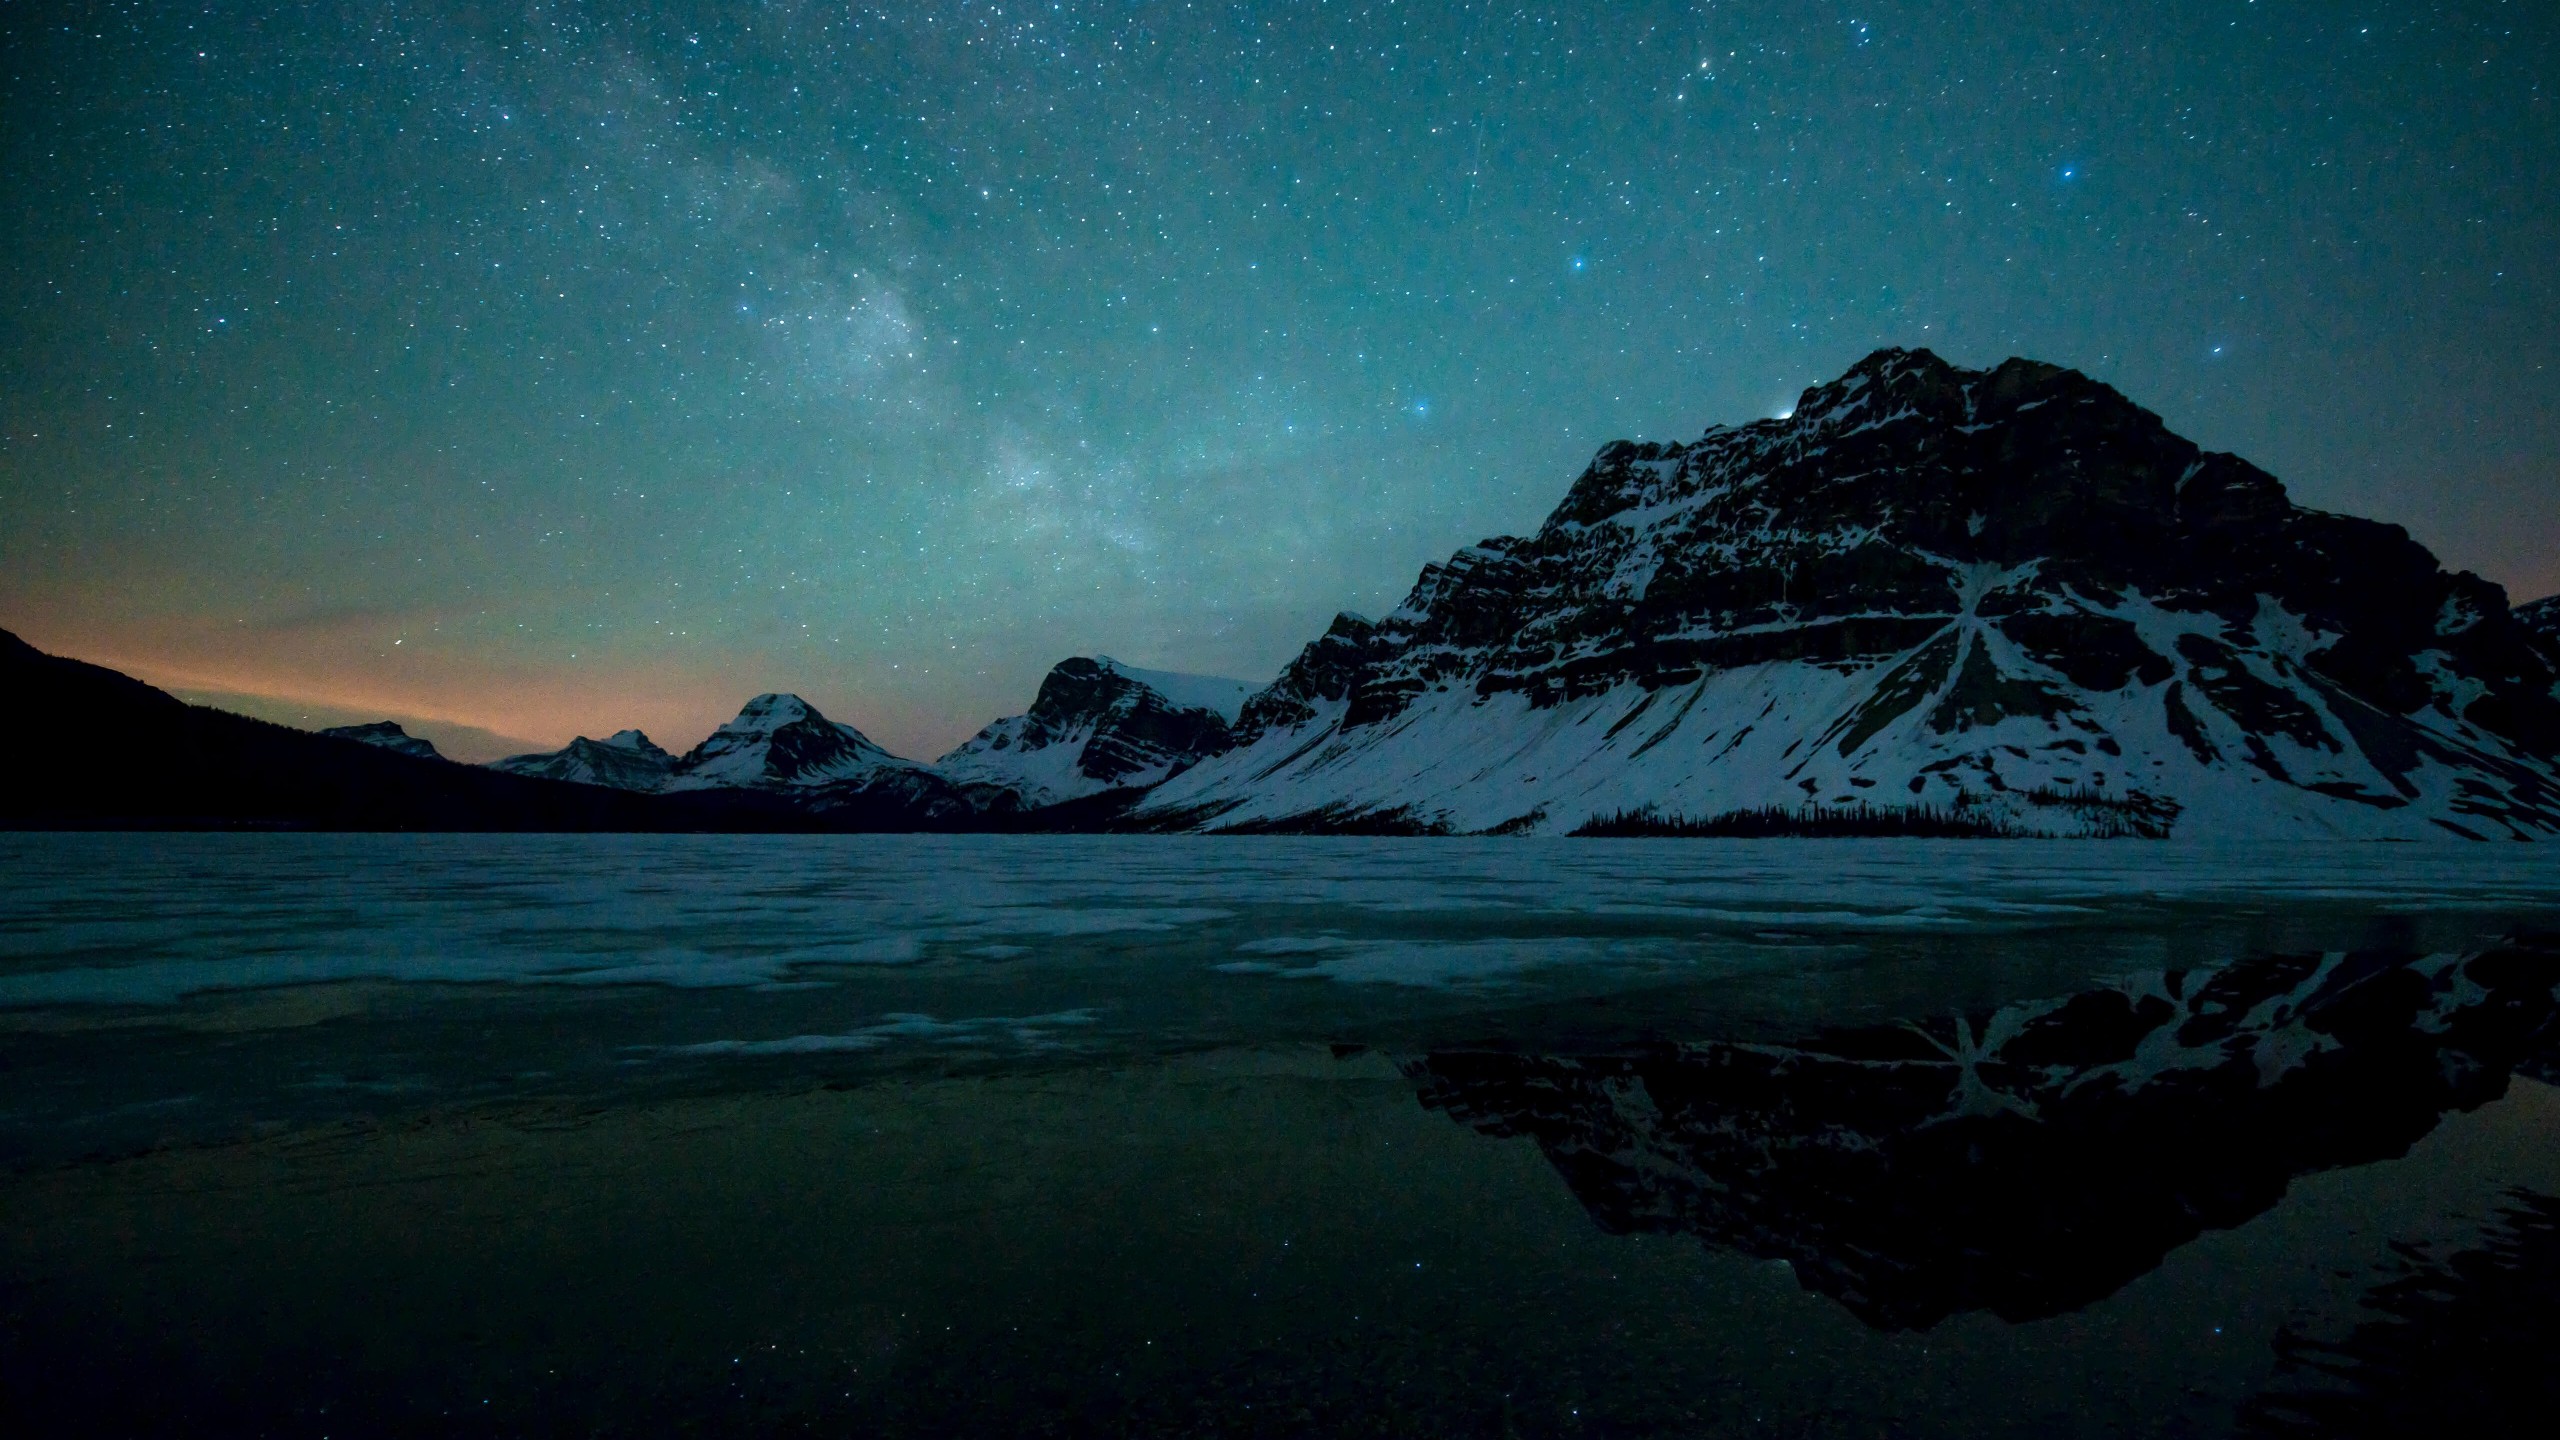 Milky Way over Bow Lake, Alberta, Canada Wallpaper for Social Media YouTube Channel Art